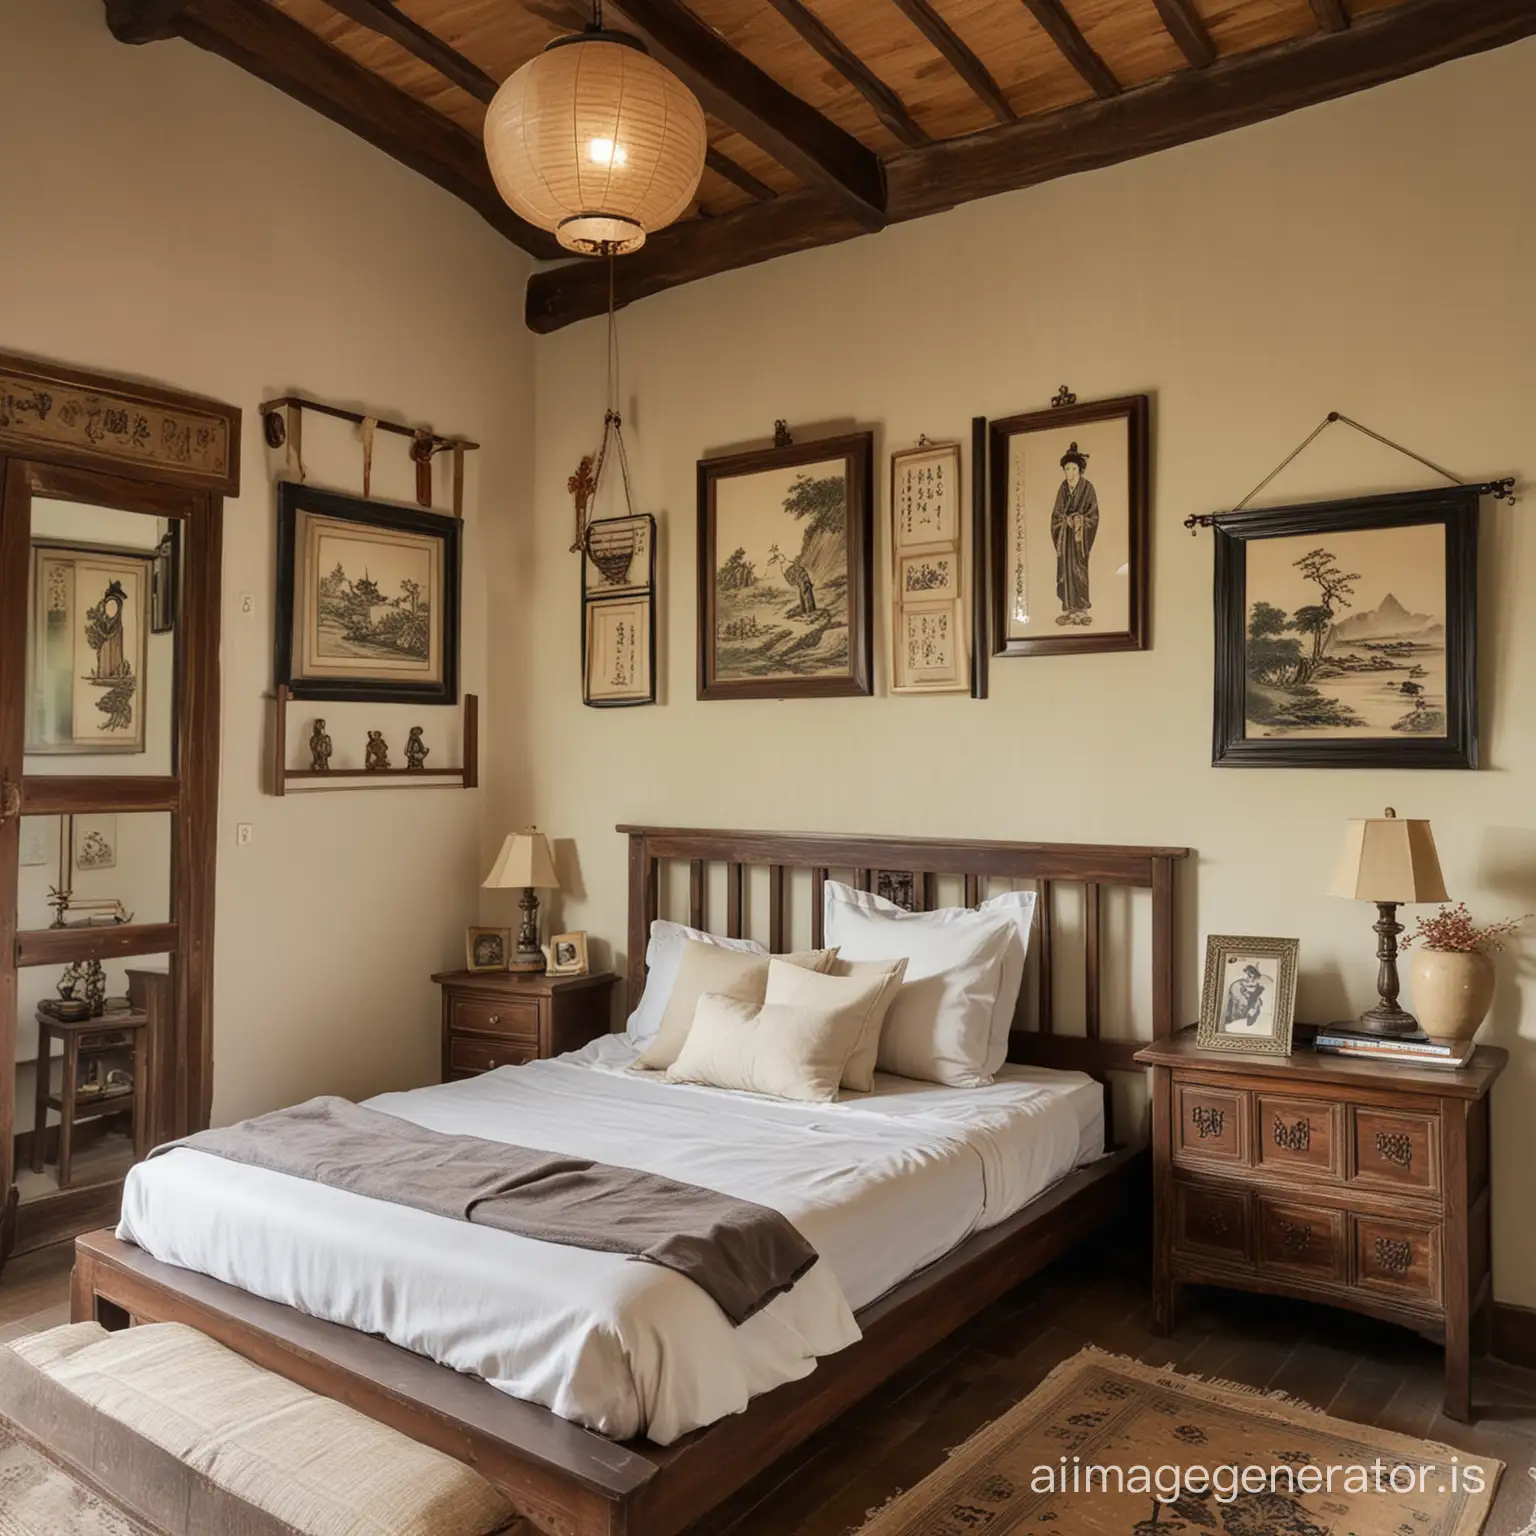 Bedroom with single bed, Asian style, old-fashioned, pictures alsia on the wall, without lamps, medival